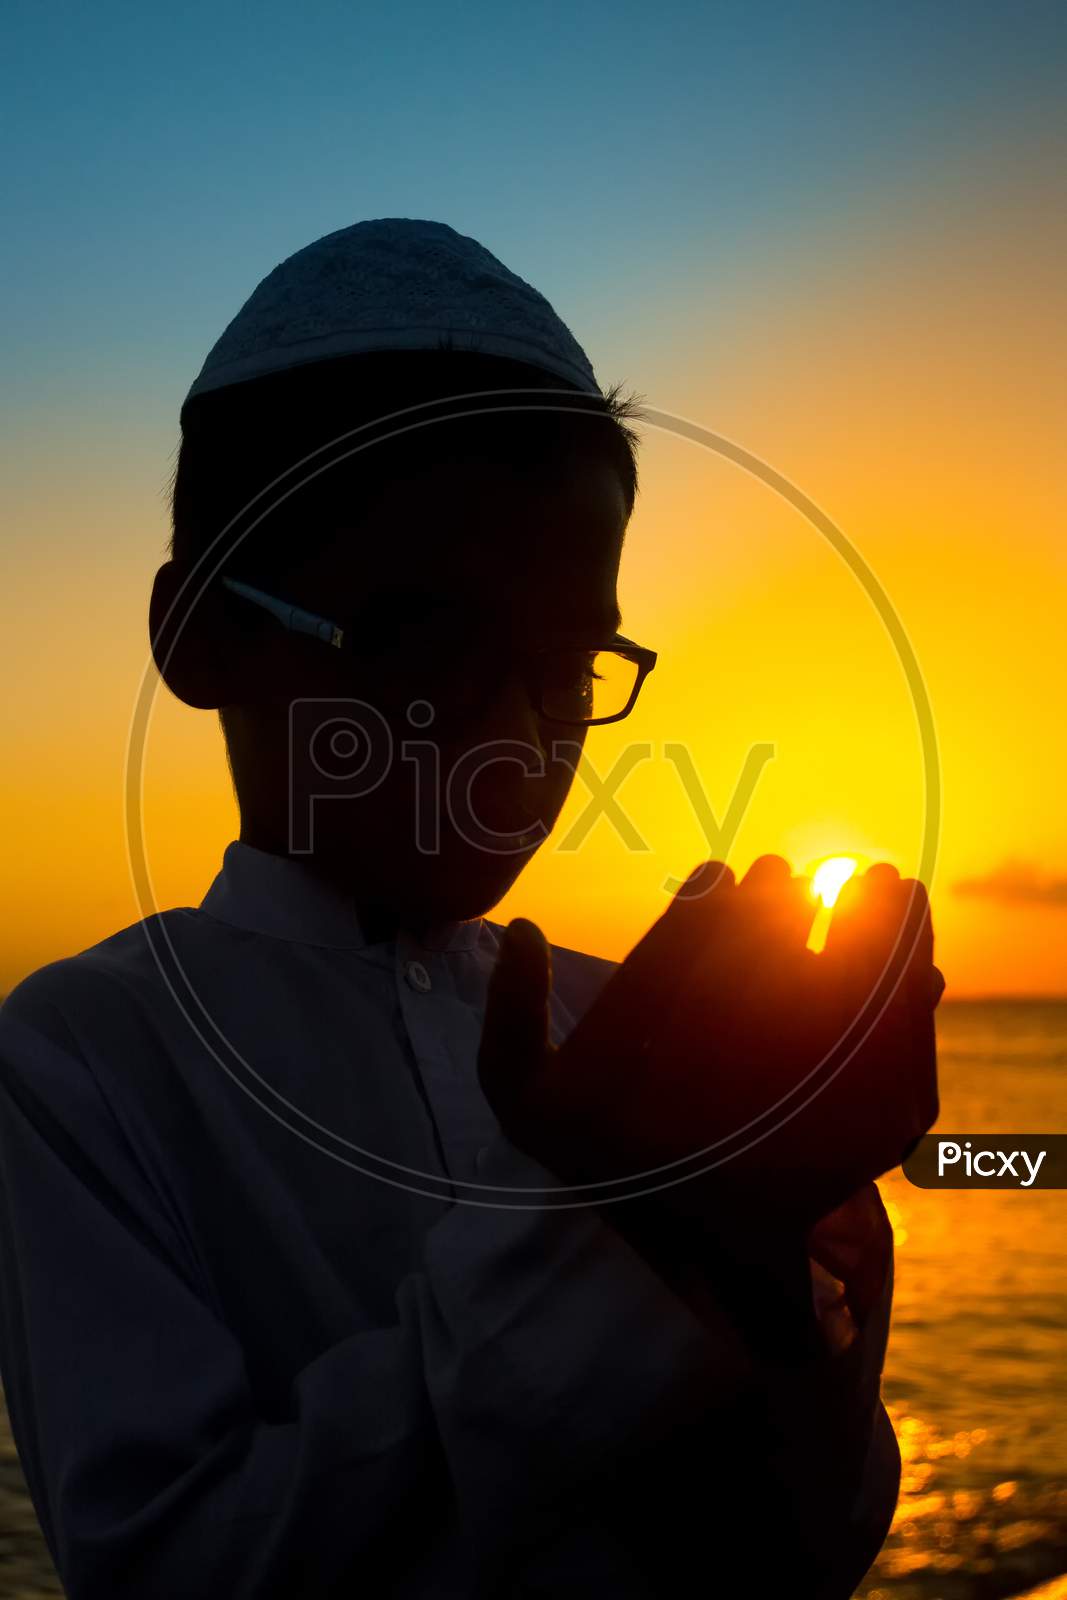 Bangladesh – June 22, 2019: A Muslim Boy Is Praying By The Riverside At Sunset In The Evening Time At Chandpur, Bangladesh.